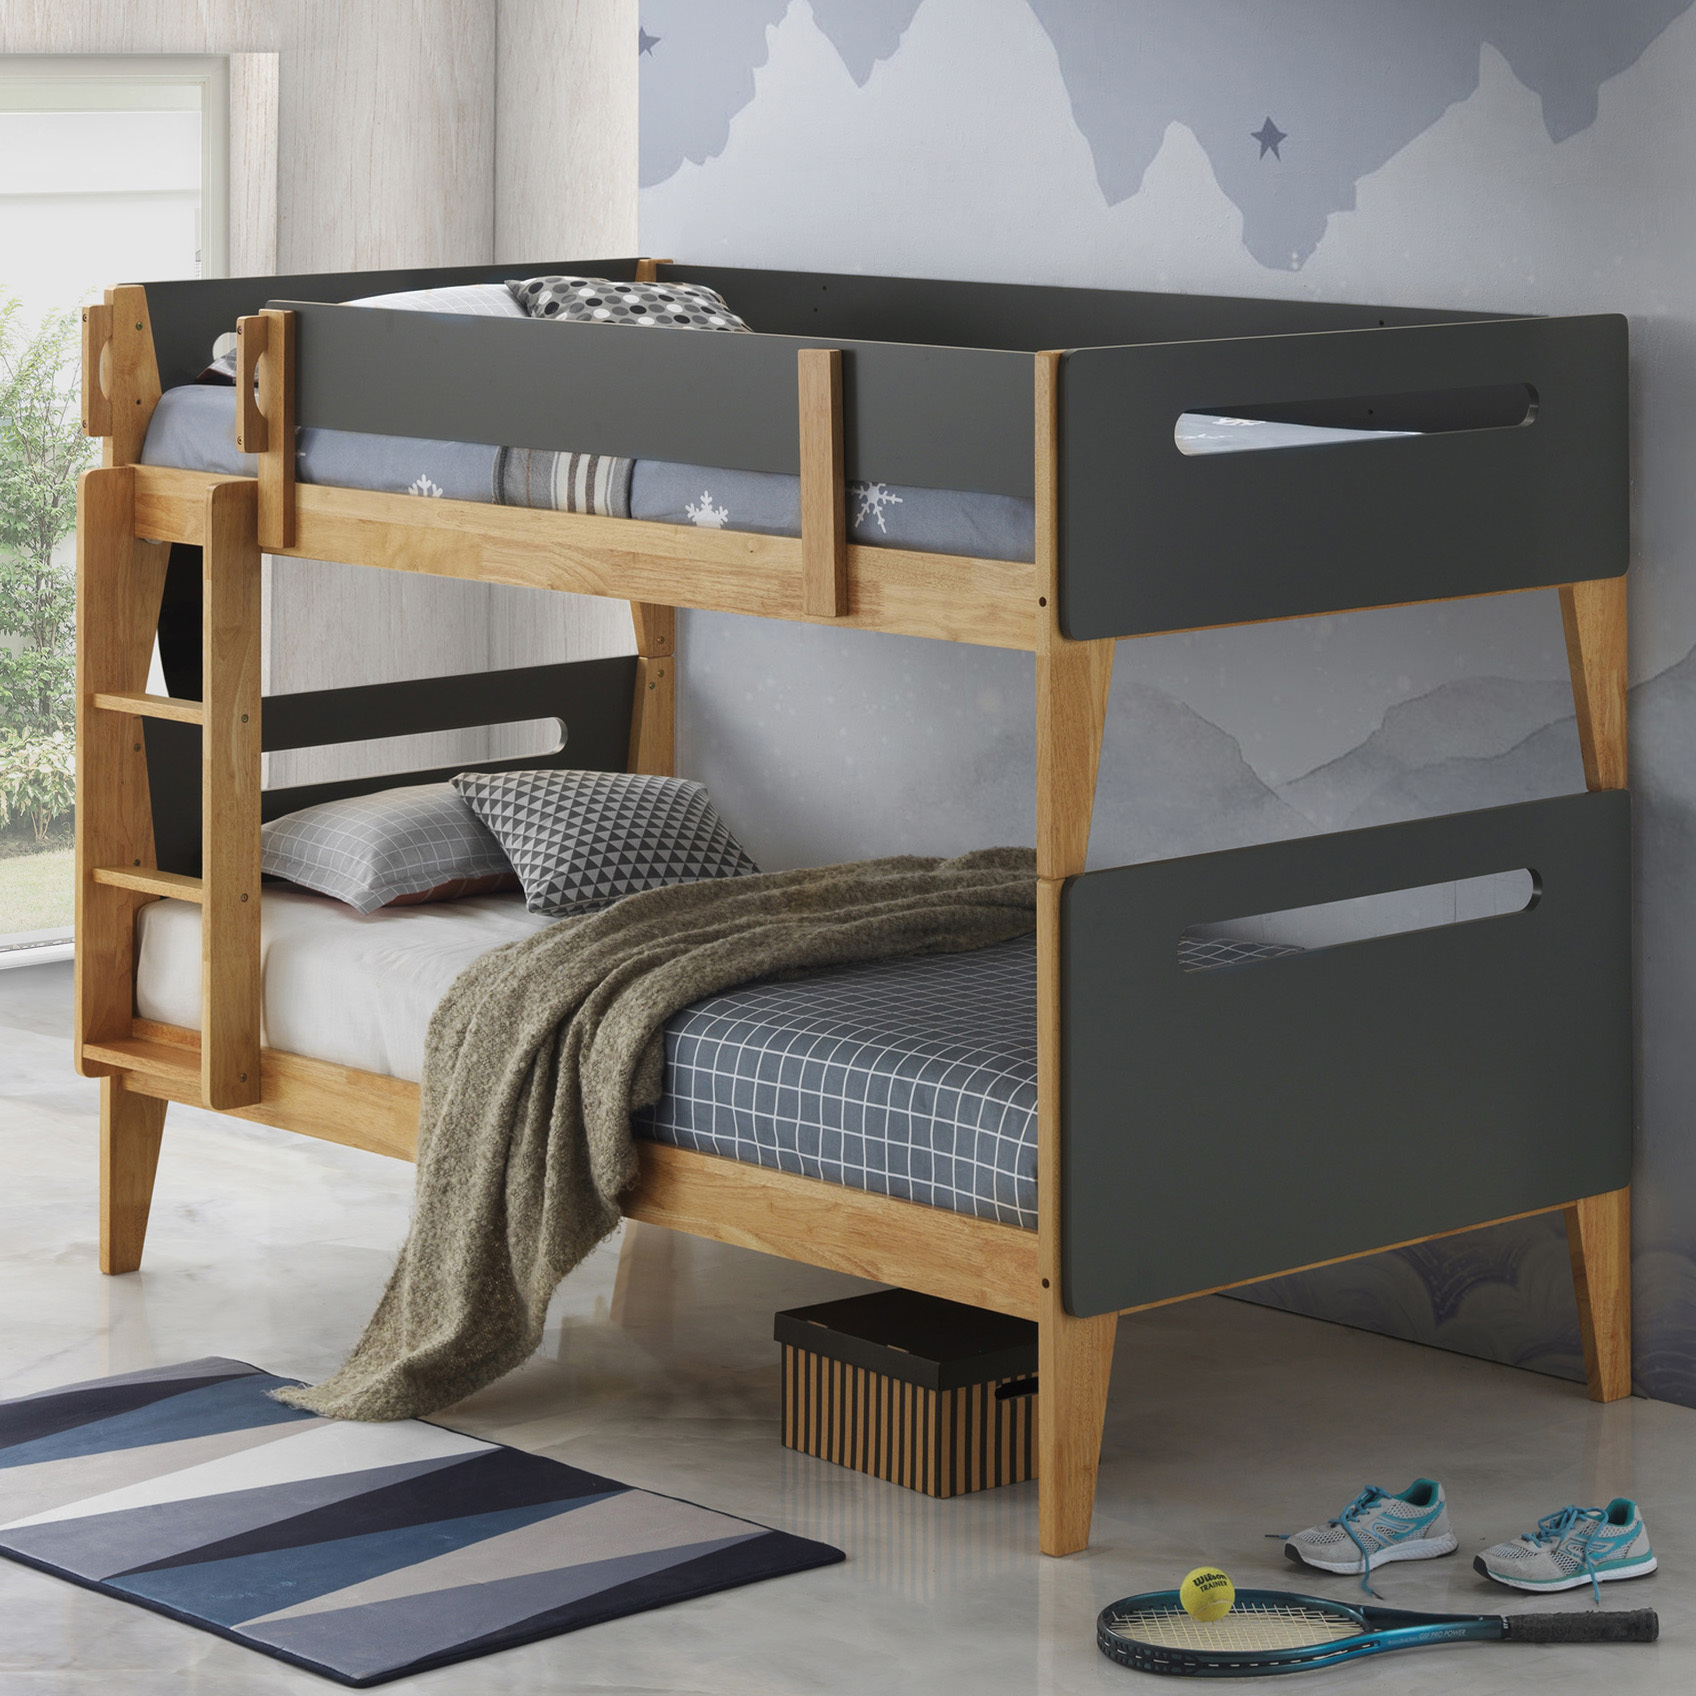 Charcoal Casla Bunk Bed Temple Webster, Bunk Beds Afterpay